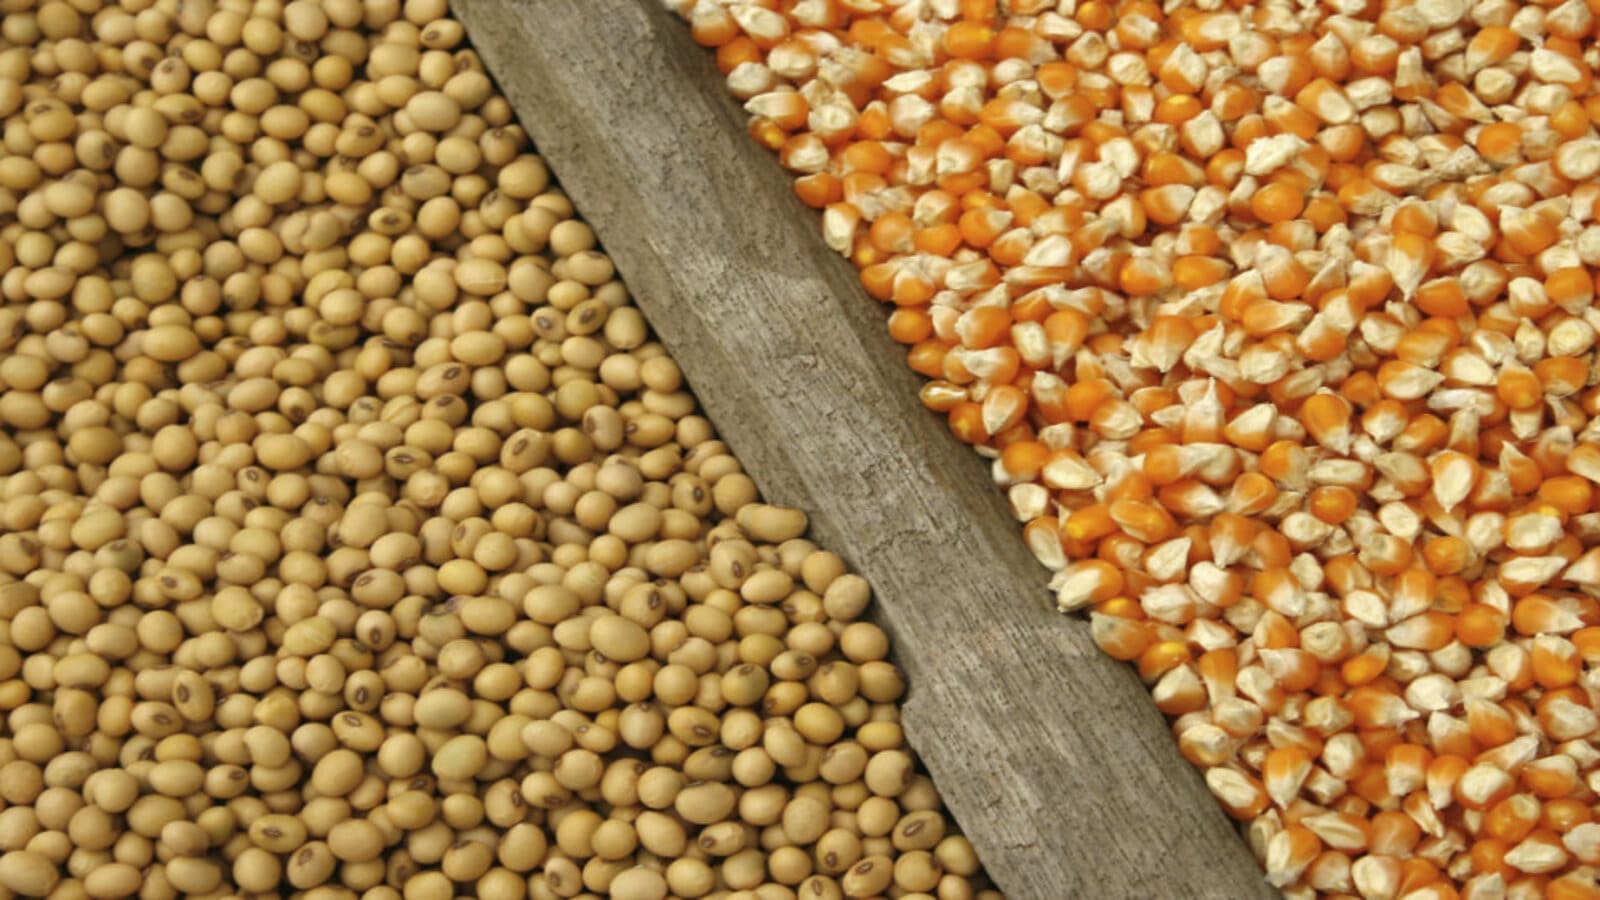 Tanzania imposes ban on soybeans, maize seeds from Malawi